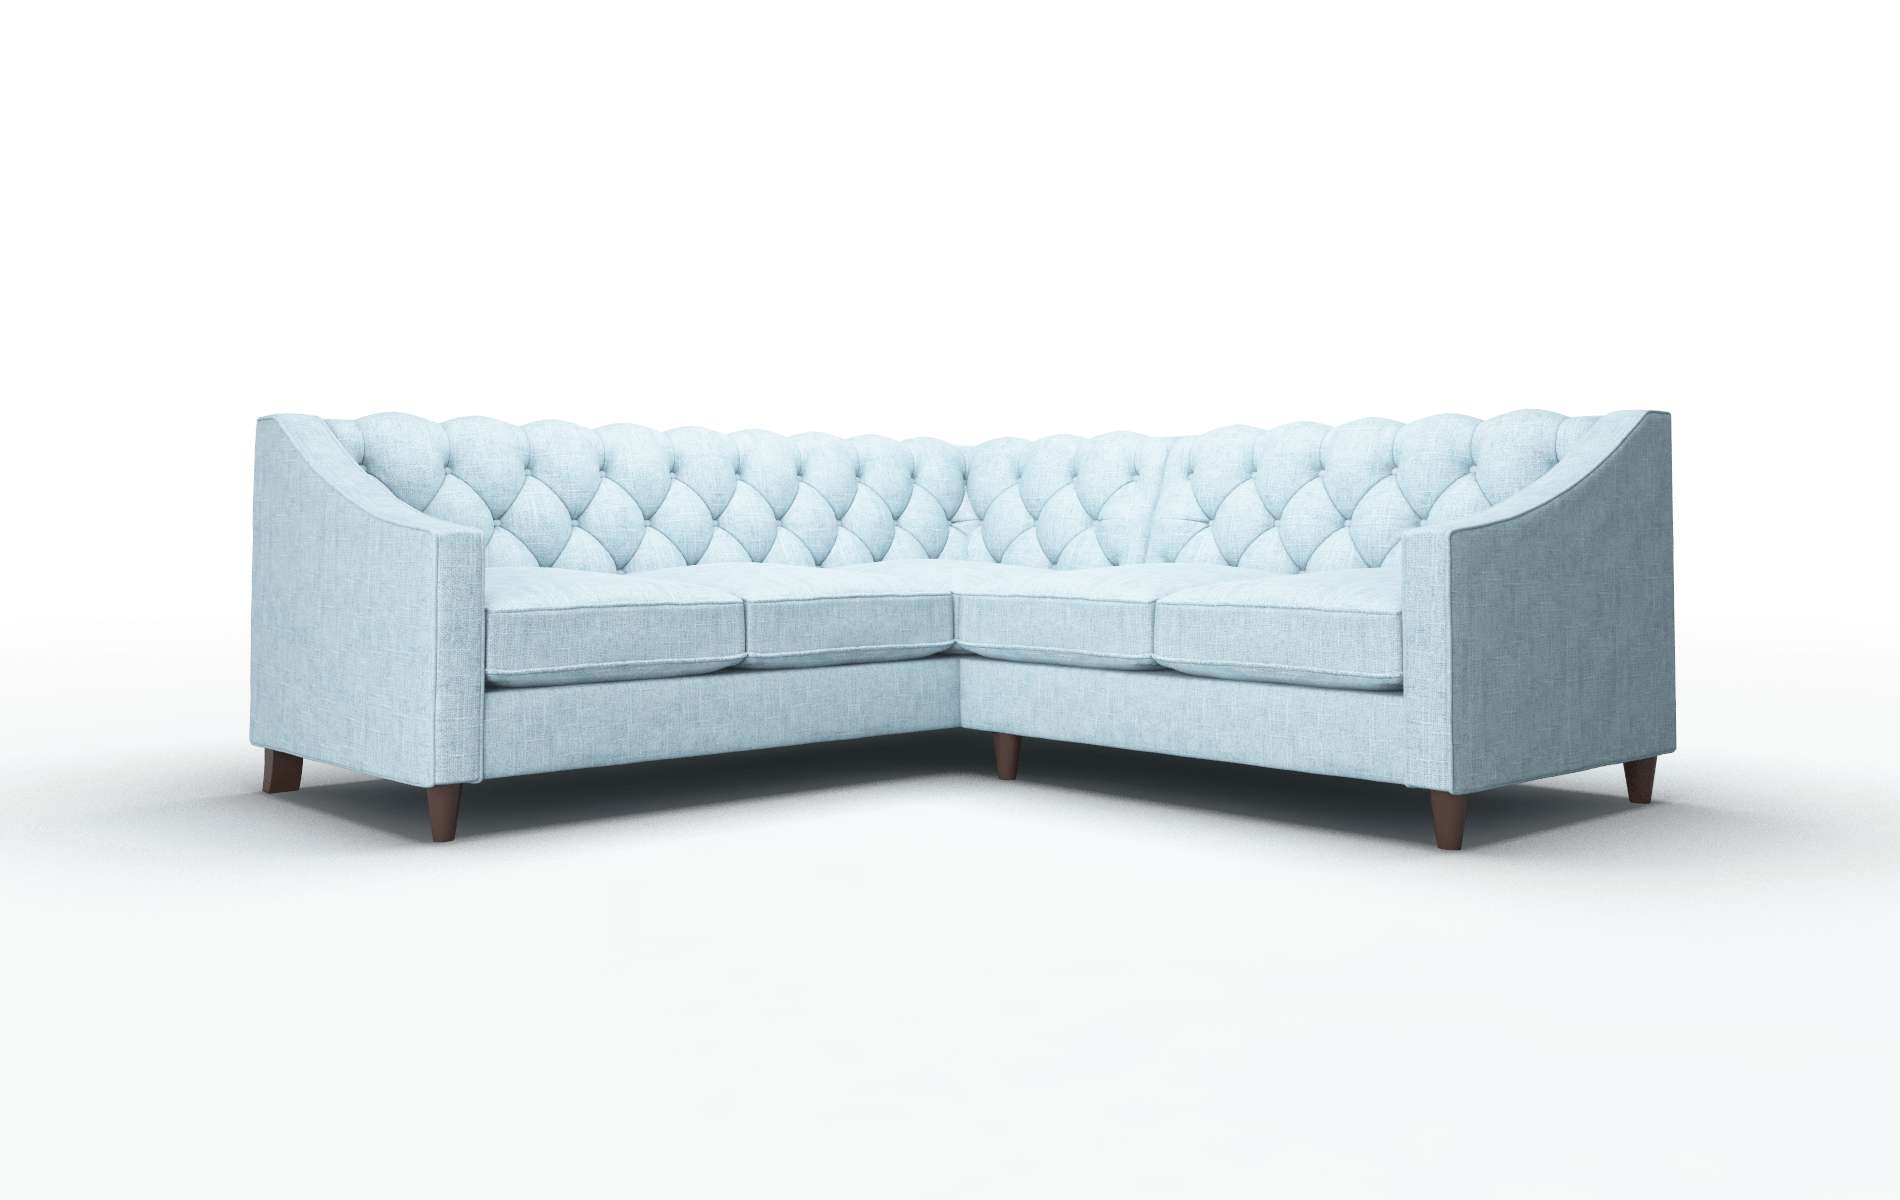 Manchester Atlas Turquoise Sectional espresso legs